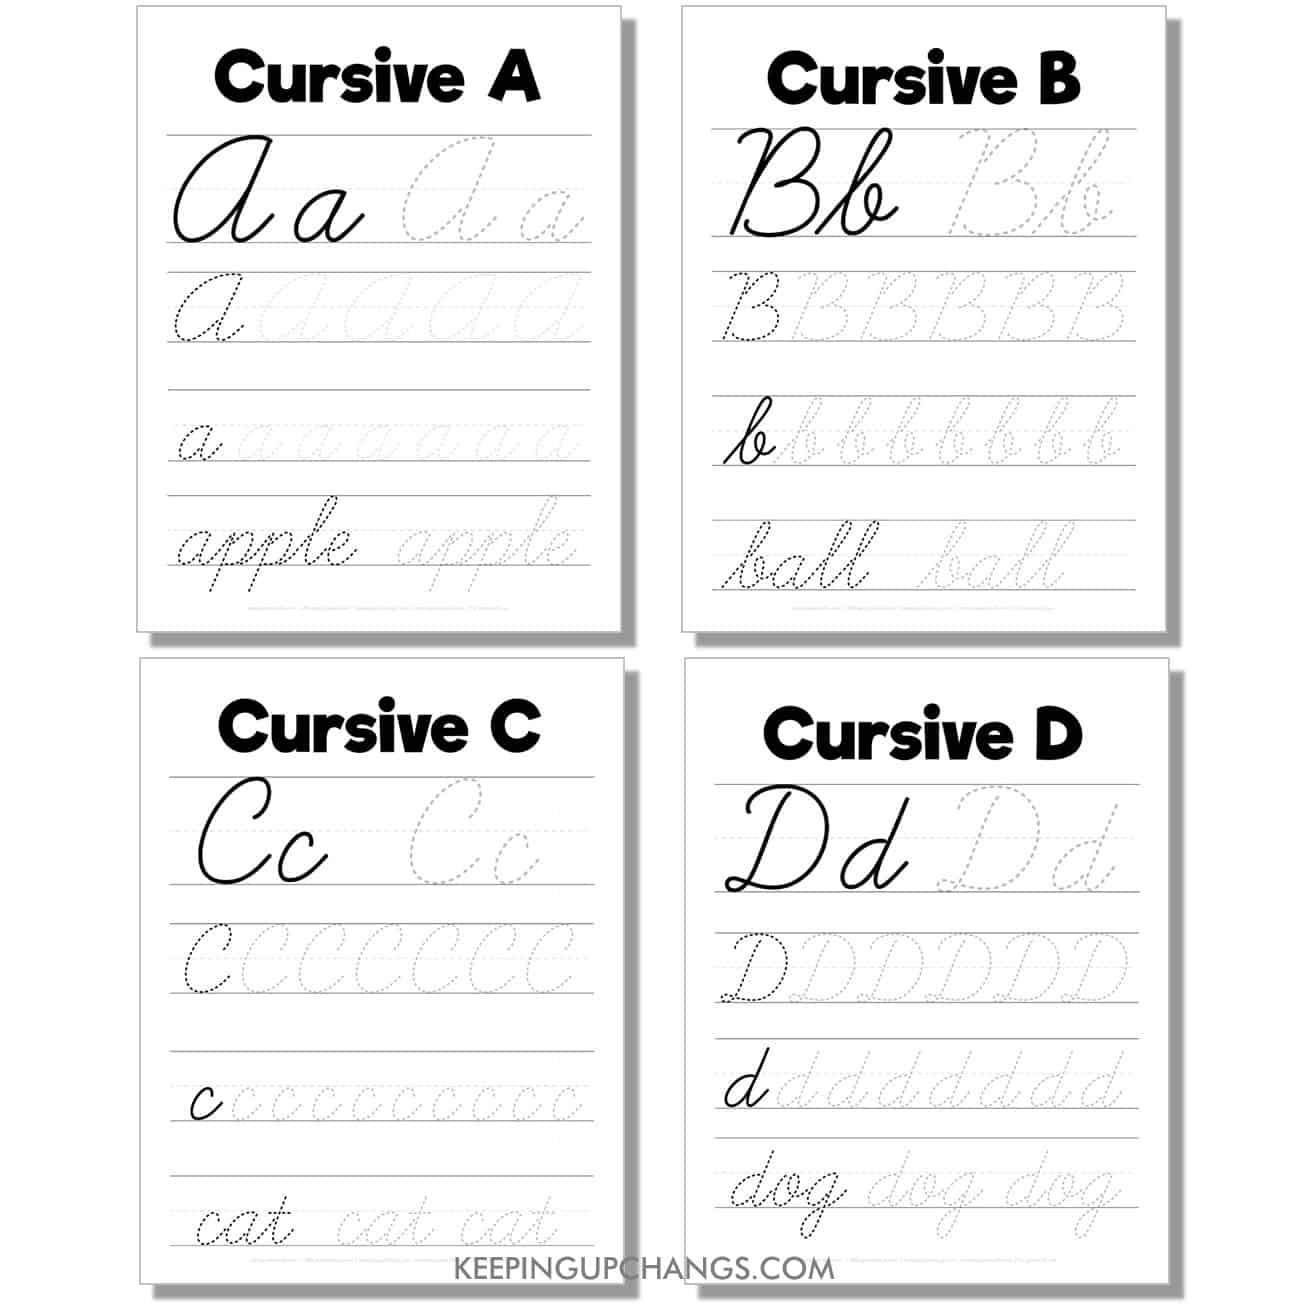 cursive worksheet with large uppercase, lowercase letters, word for a, b, c, d.